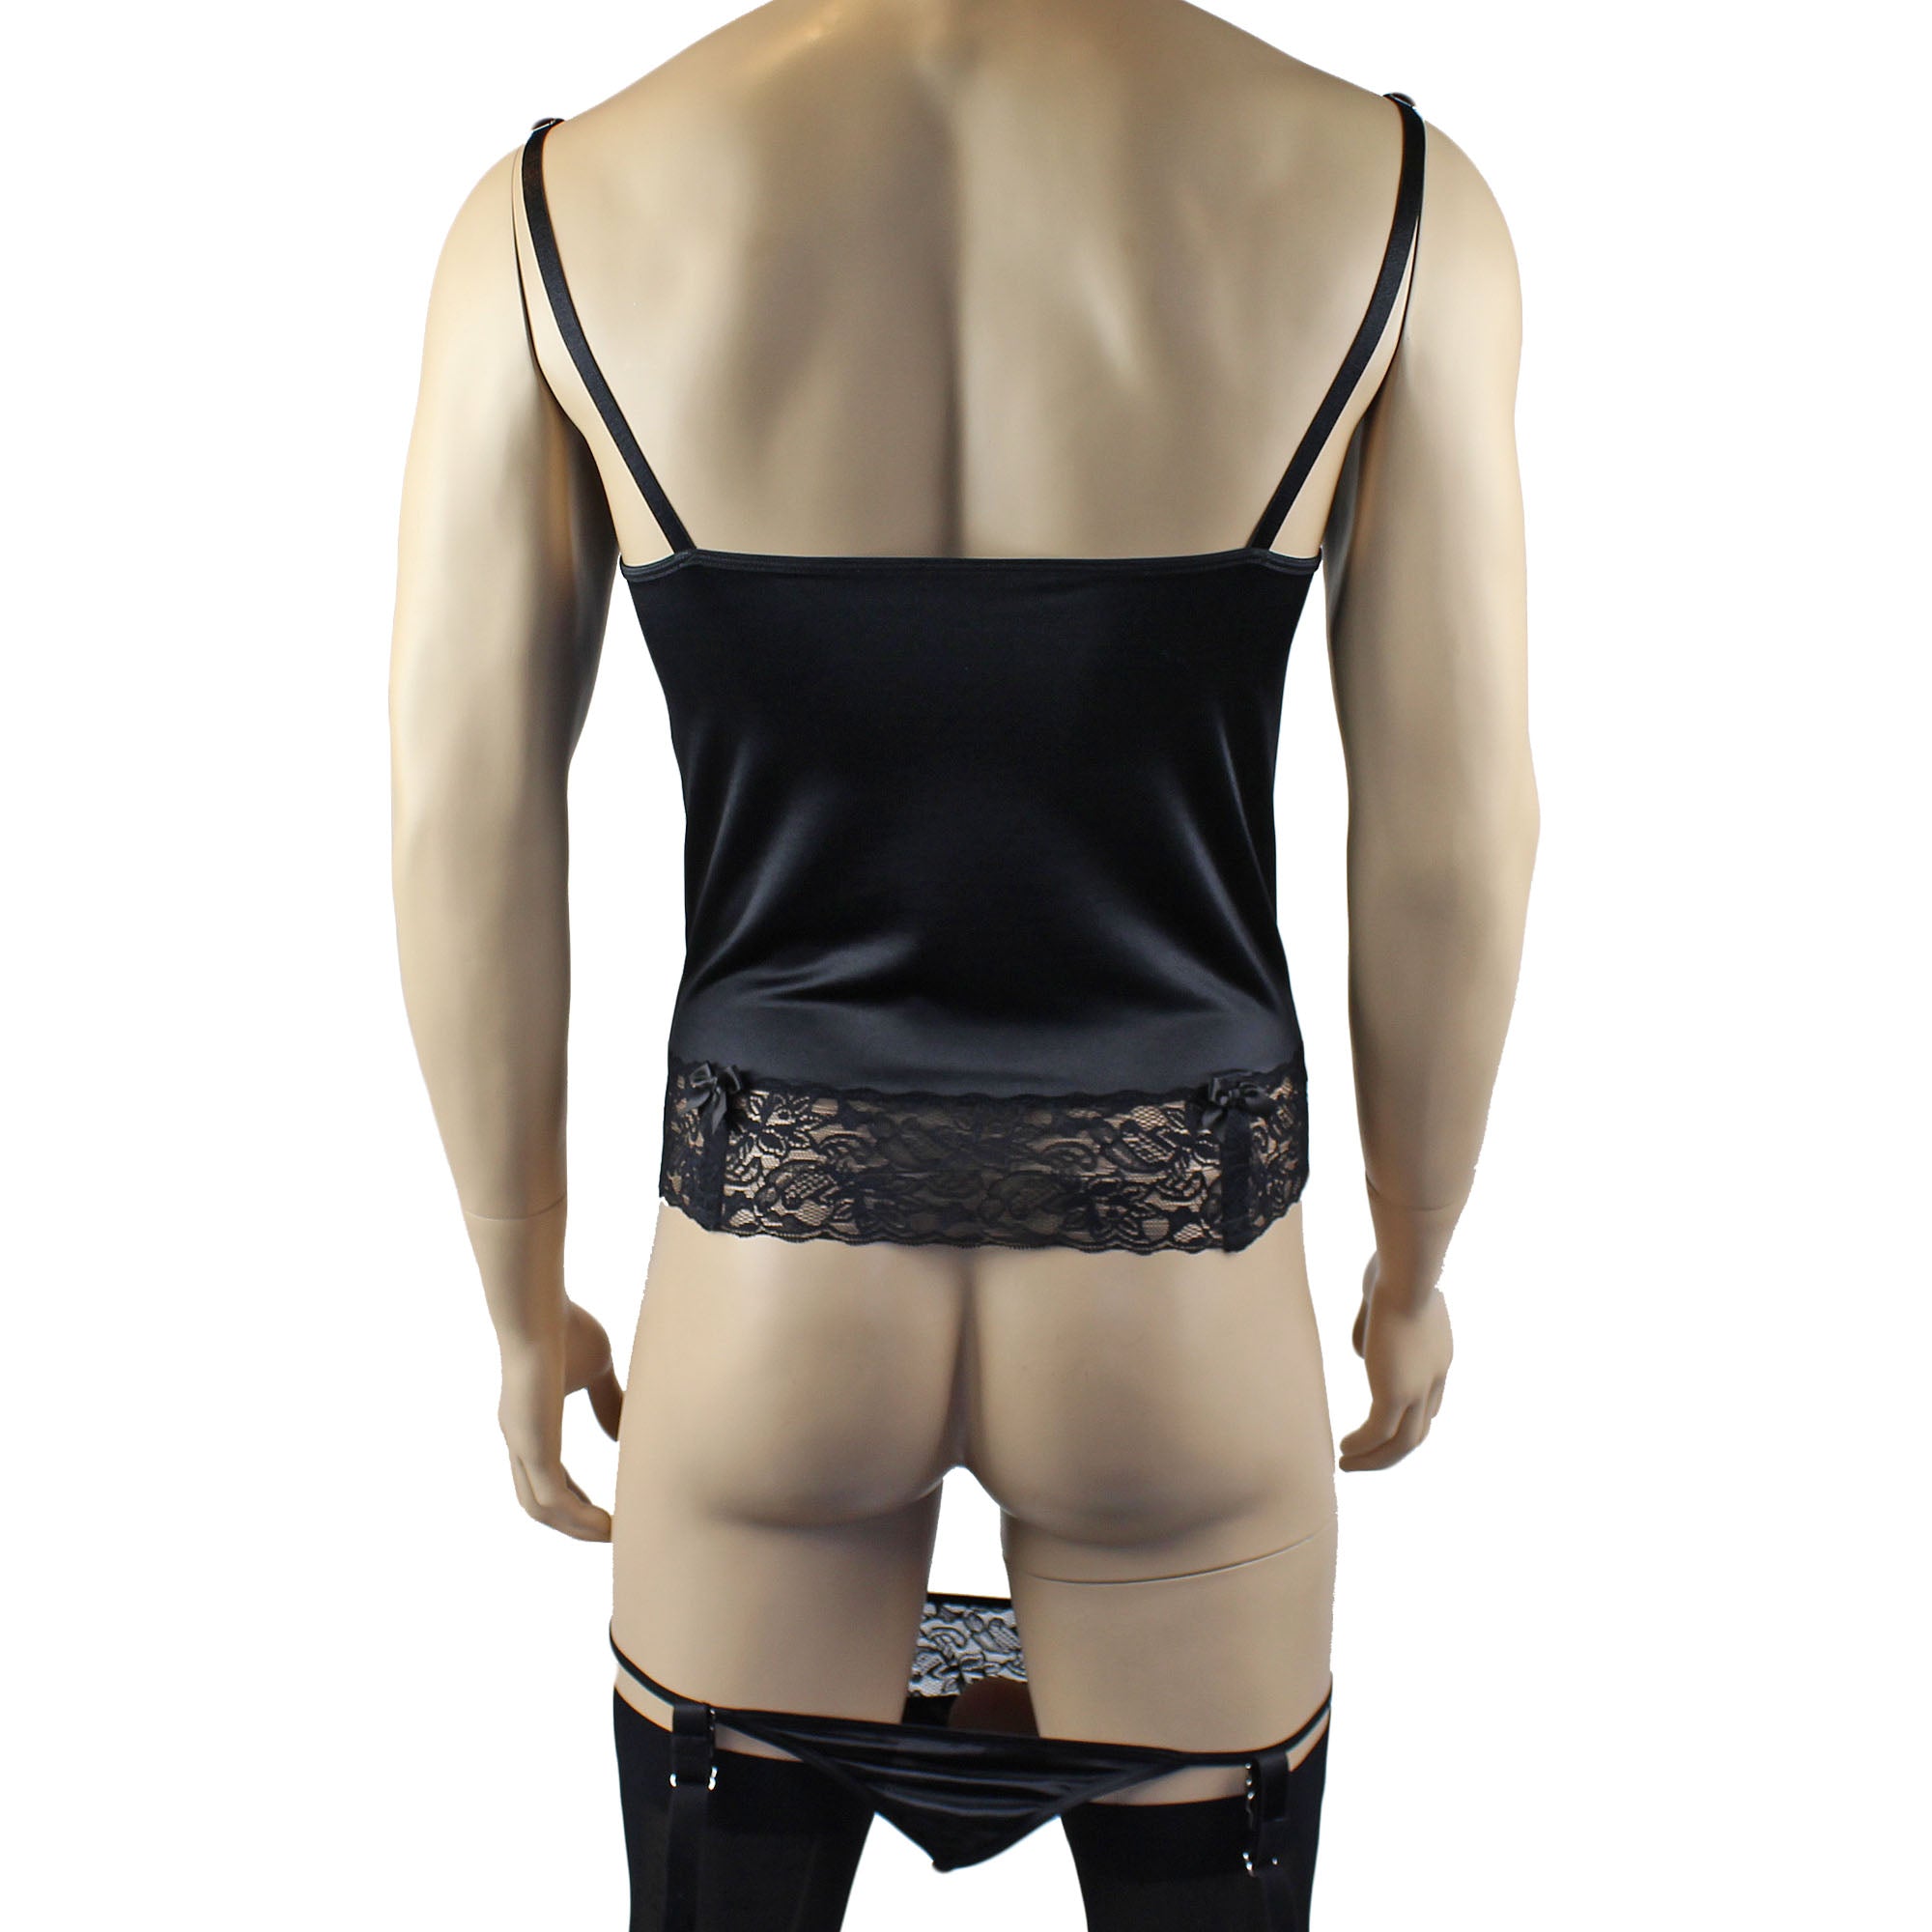 Male Romance Stretch Spandex Corset Camisole Top & G string for Lingerie Men White or Black